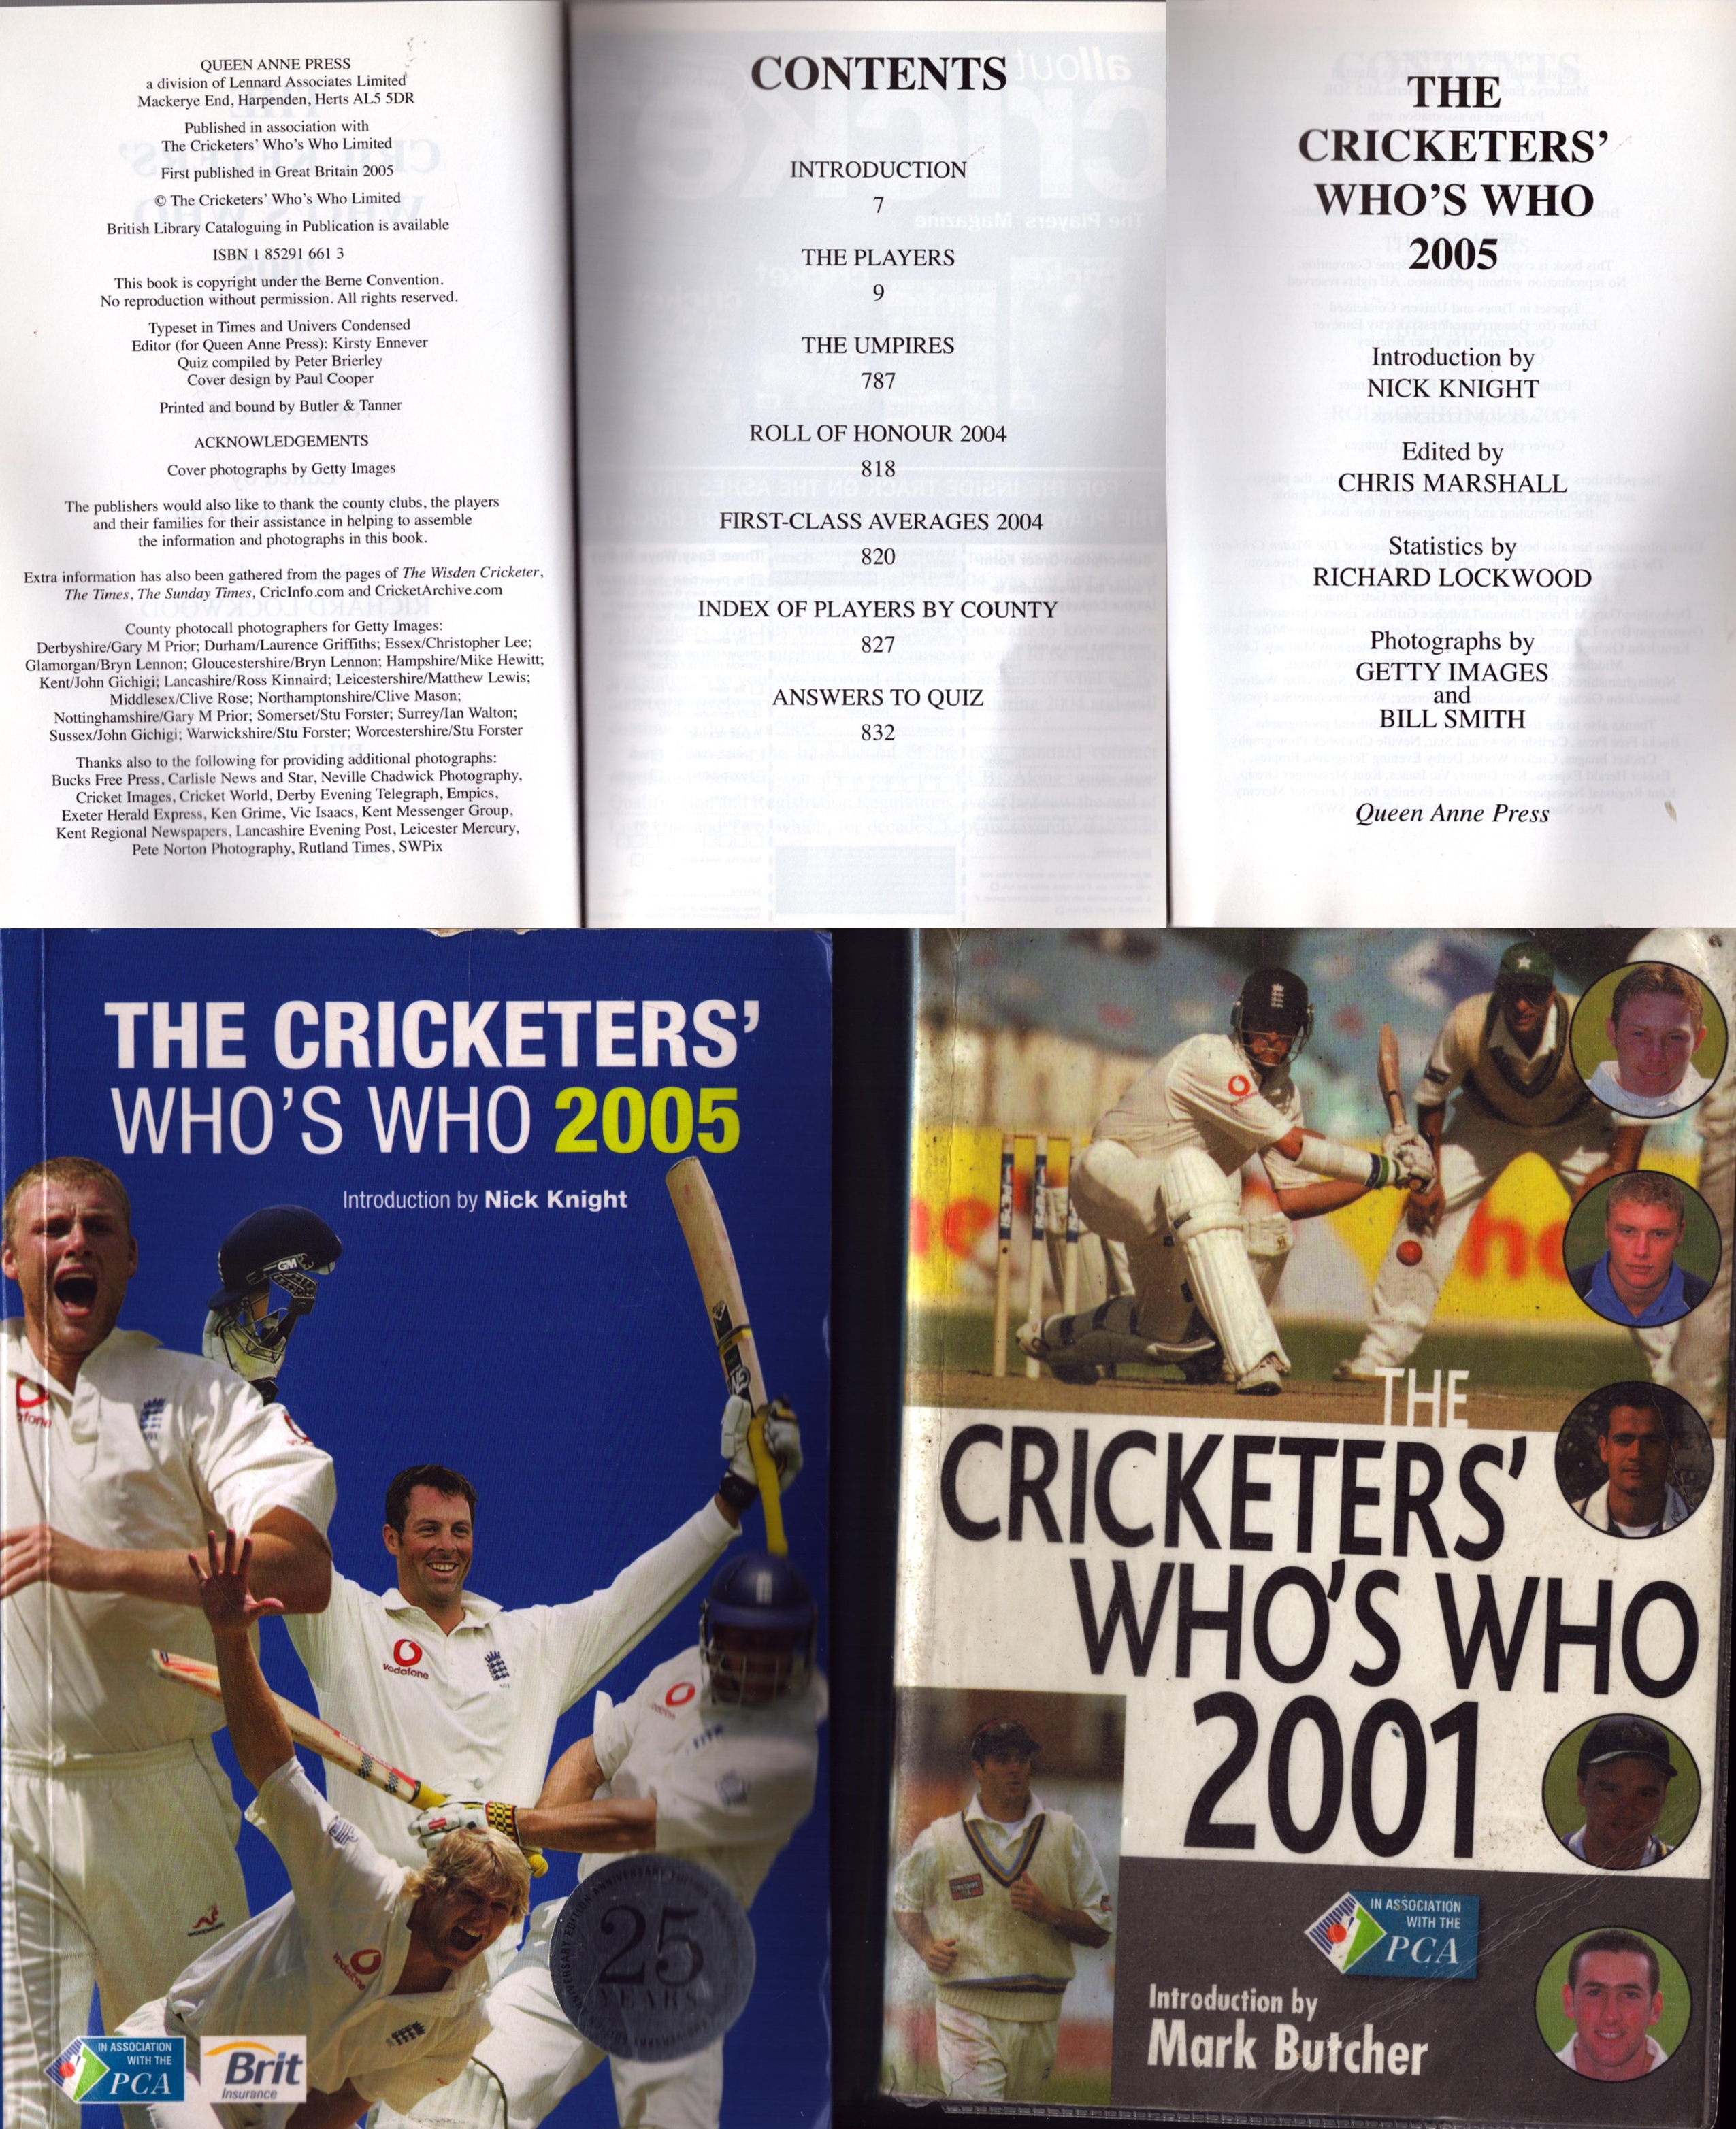 Cricket collection of 2 'Cricketer's Who's Who' books, 2001 and 2005 copies. 2001 signed by many